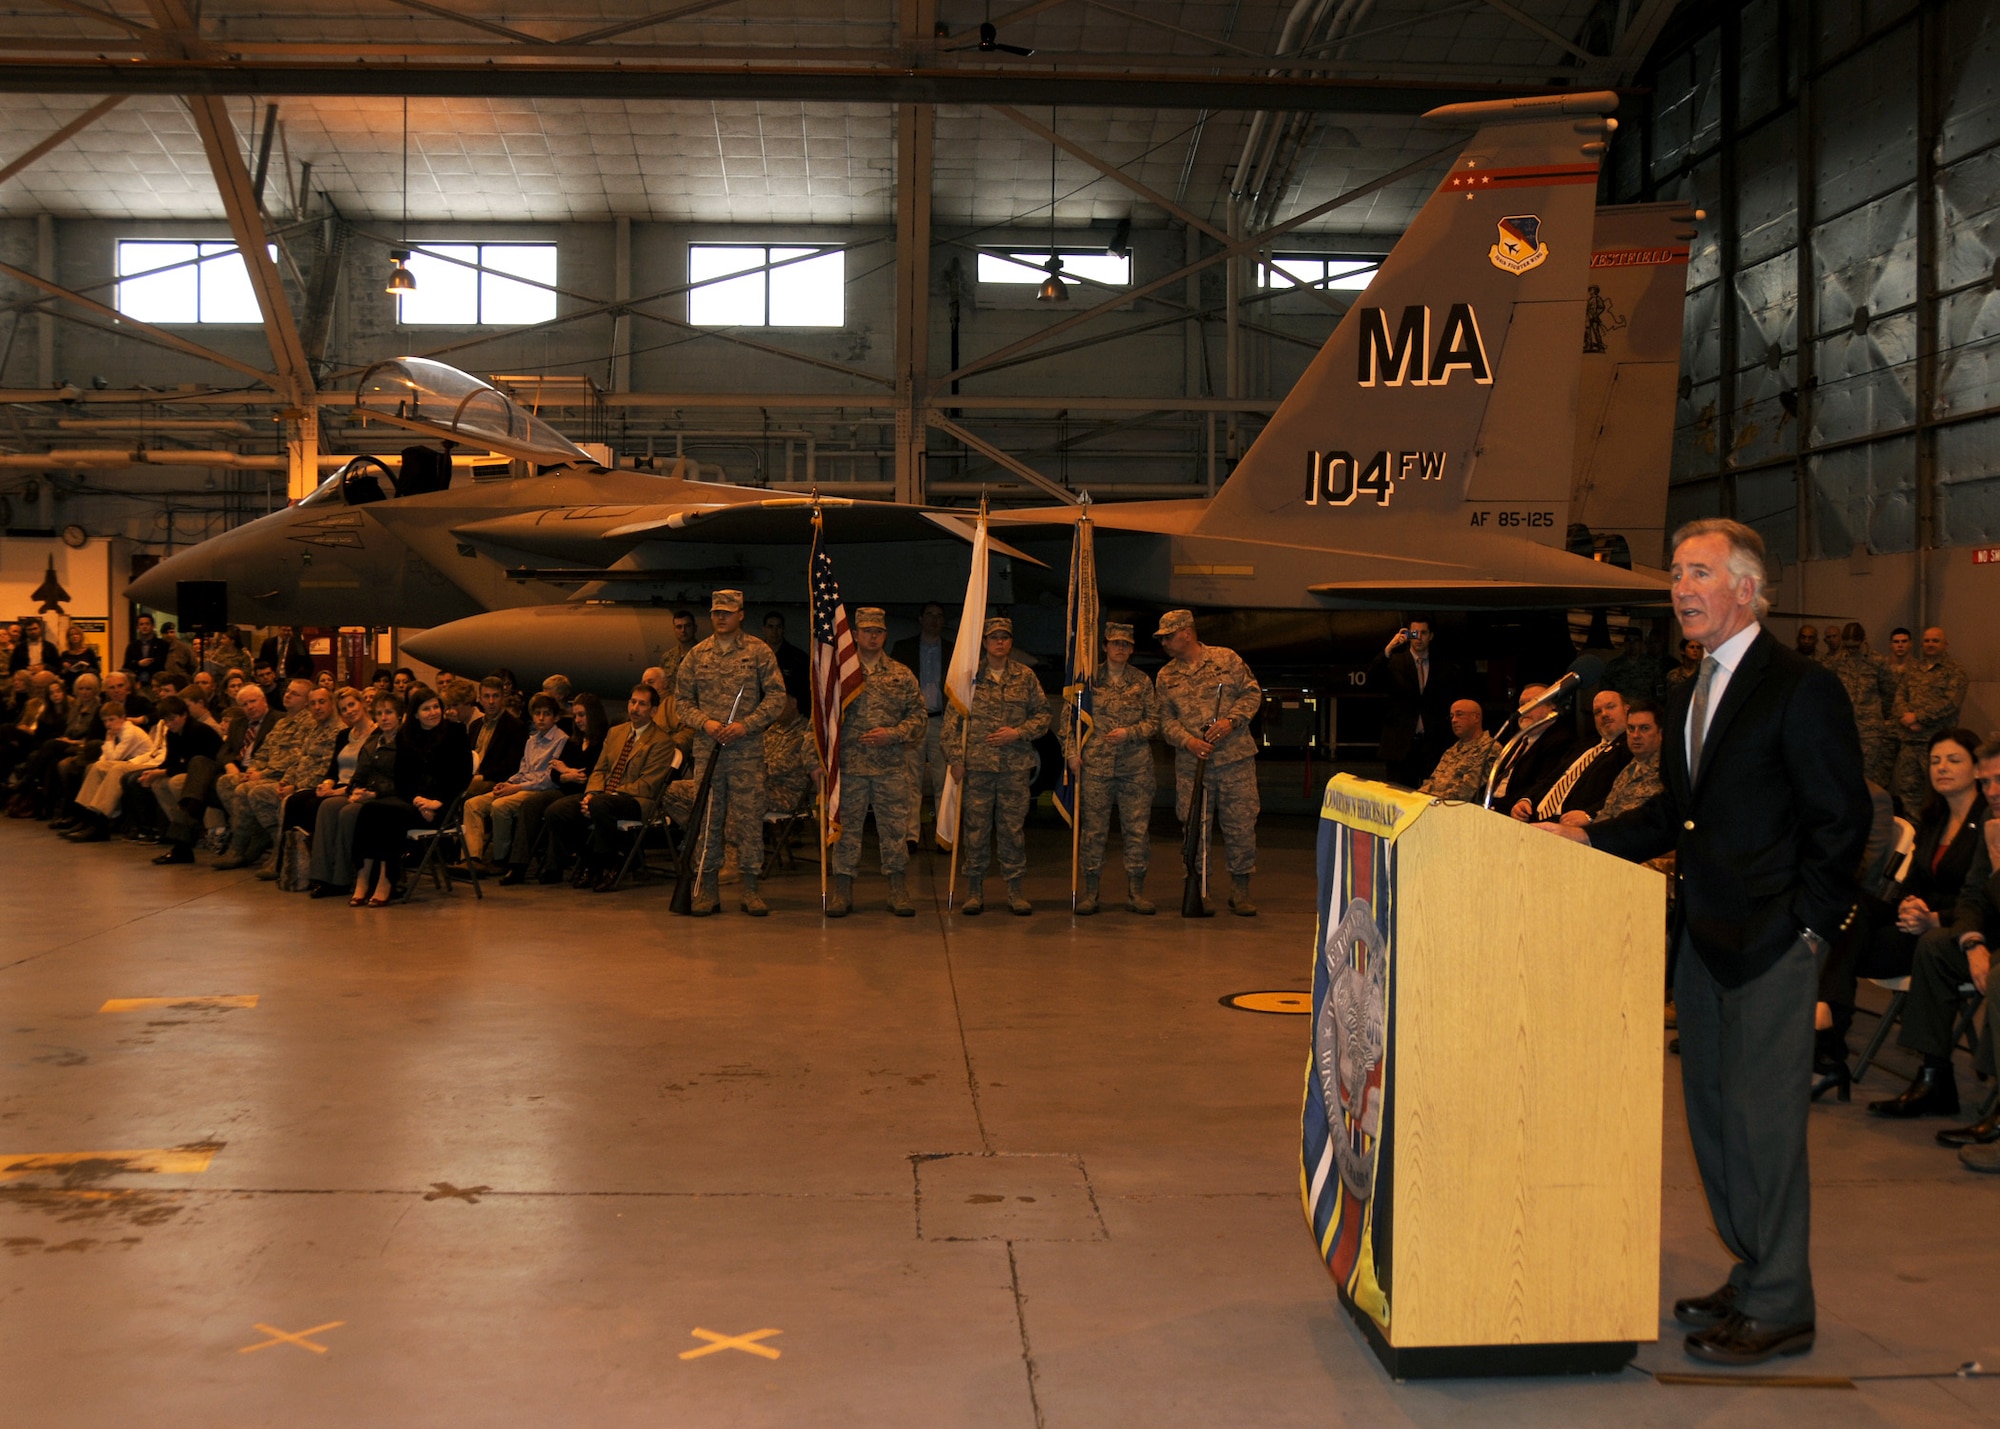 On March 3rd, 2012 Congressman Richard Neal speaks to the members of the 104th Fighter Wing during a Commander’s Call that was held in the main hanger at the 104th Fighter Wing Barnes Air National Guard Base, Westfield, MA. This commander’s call was held to give several members of the wing award. This event was also to recognize members of the wing who will deploy next month, a change in command and members who have returned from a deployment. (Air National Guard photo by Master Sergeant Mark Fortin)